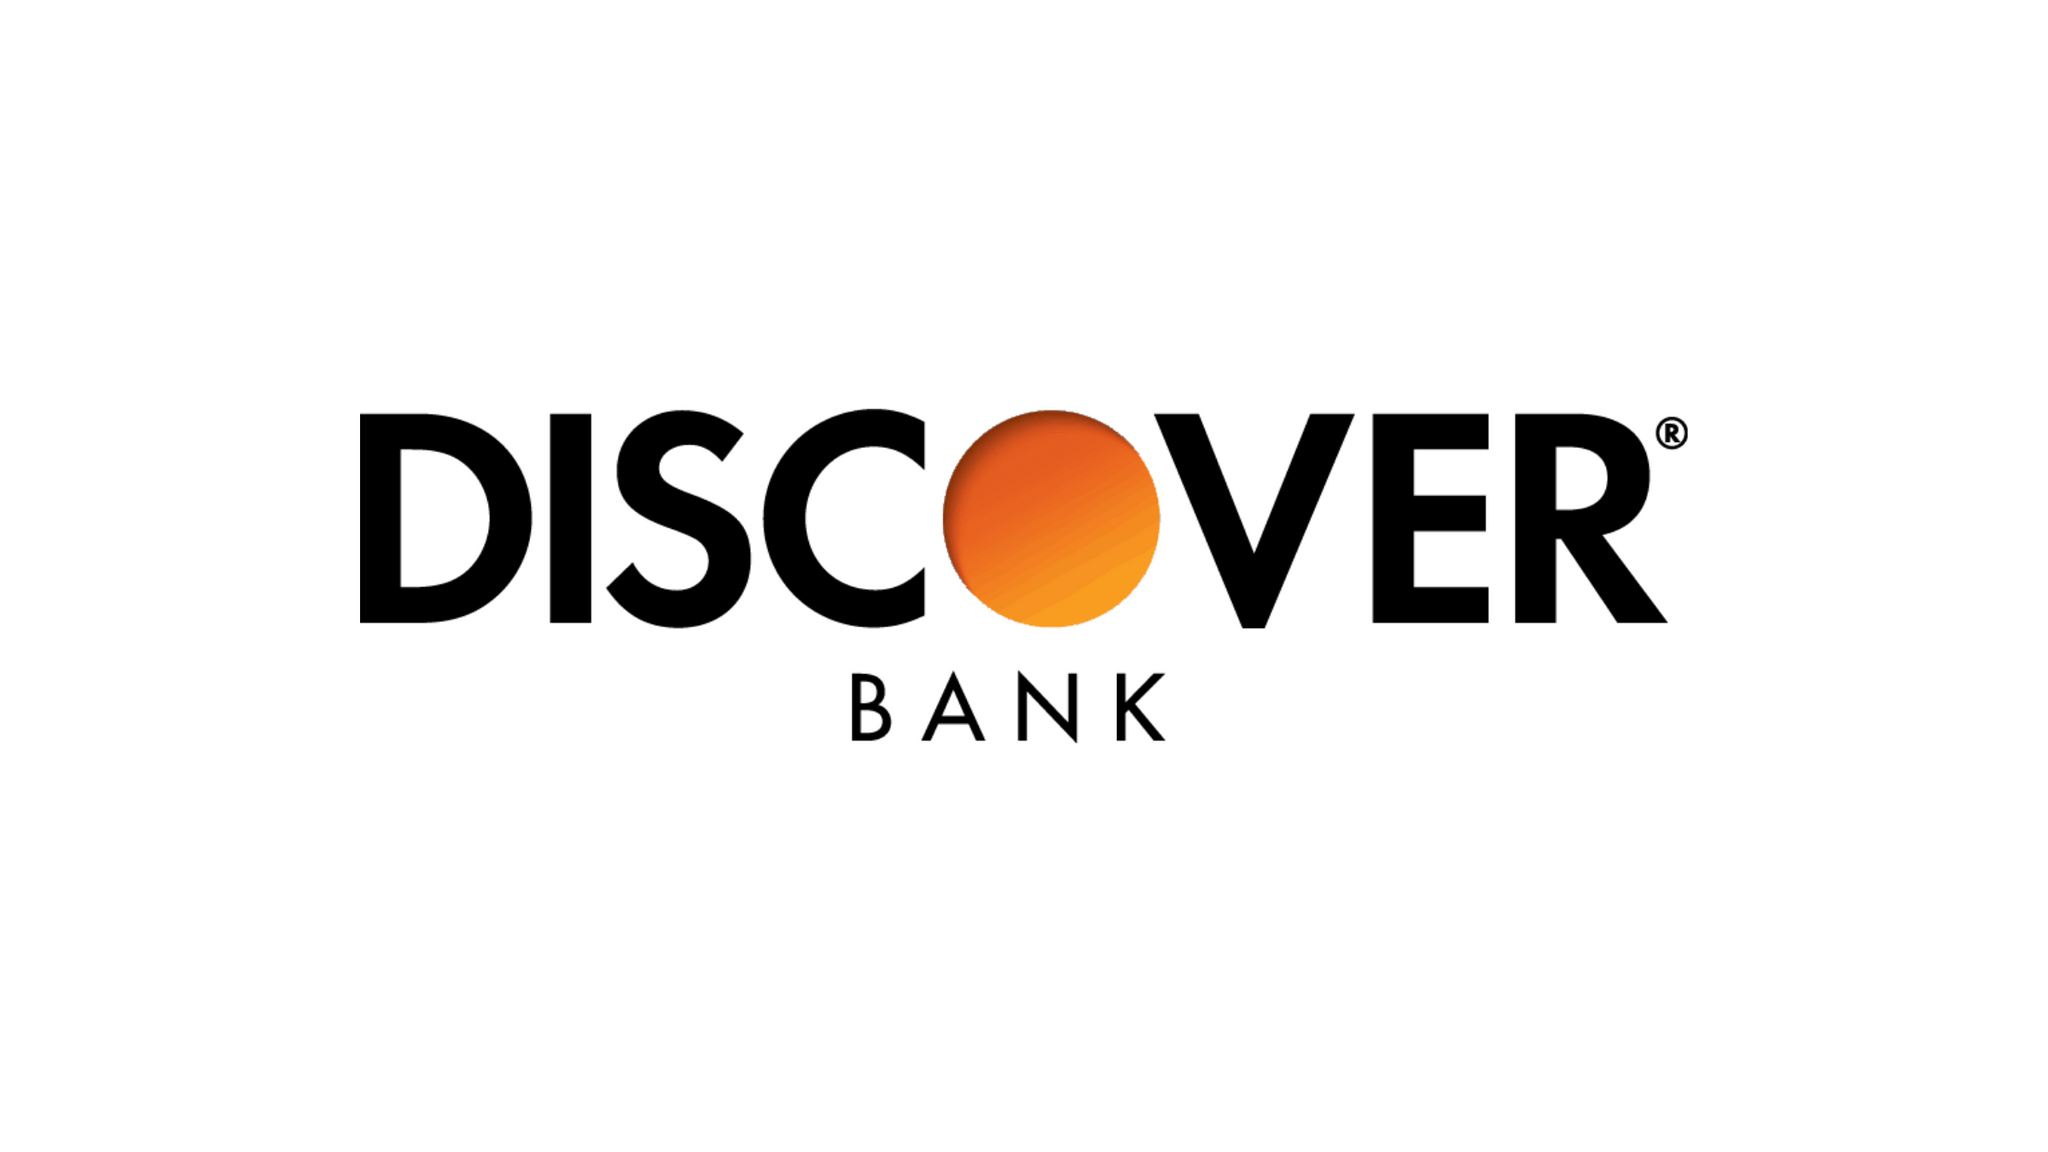 Banking Tips and Tricks: Discover Bank